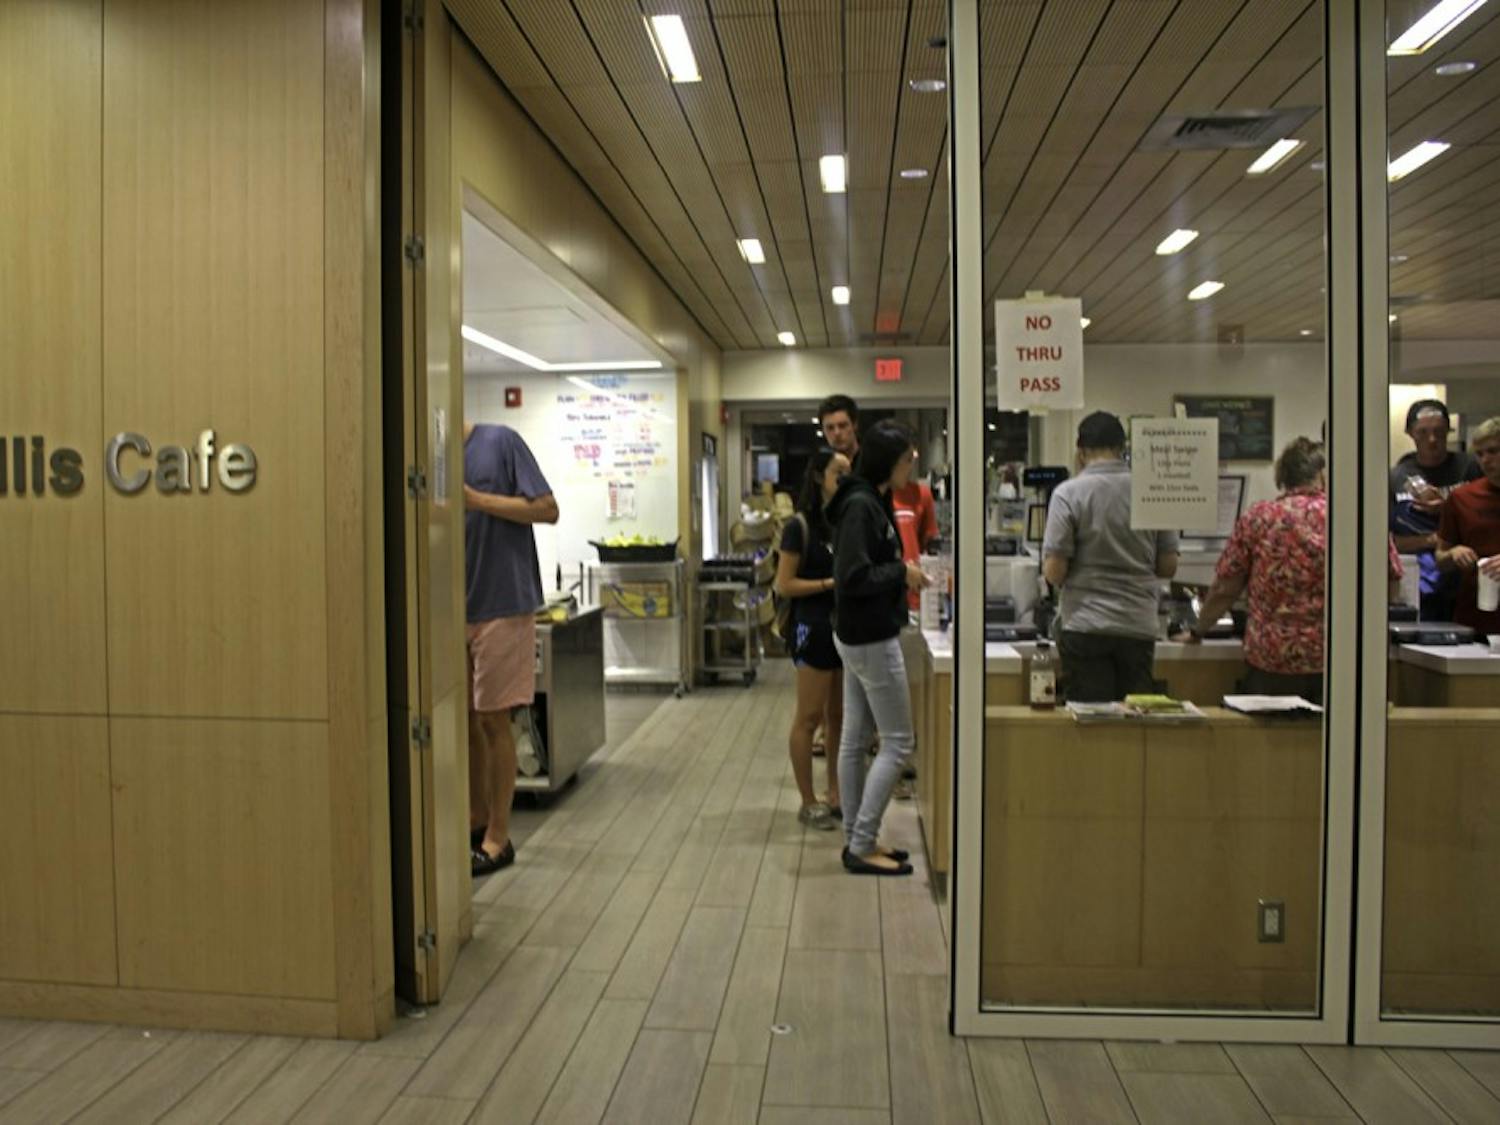 Cashiers keep an eye on students at Collis late night, where entry is now restricted to one side.